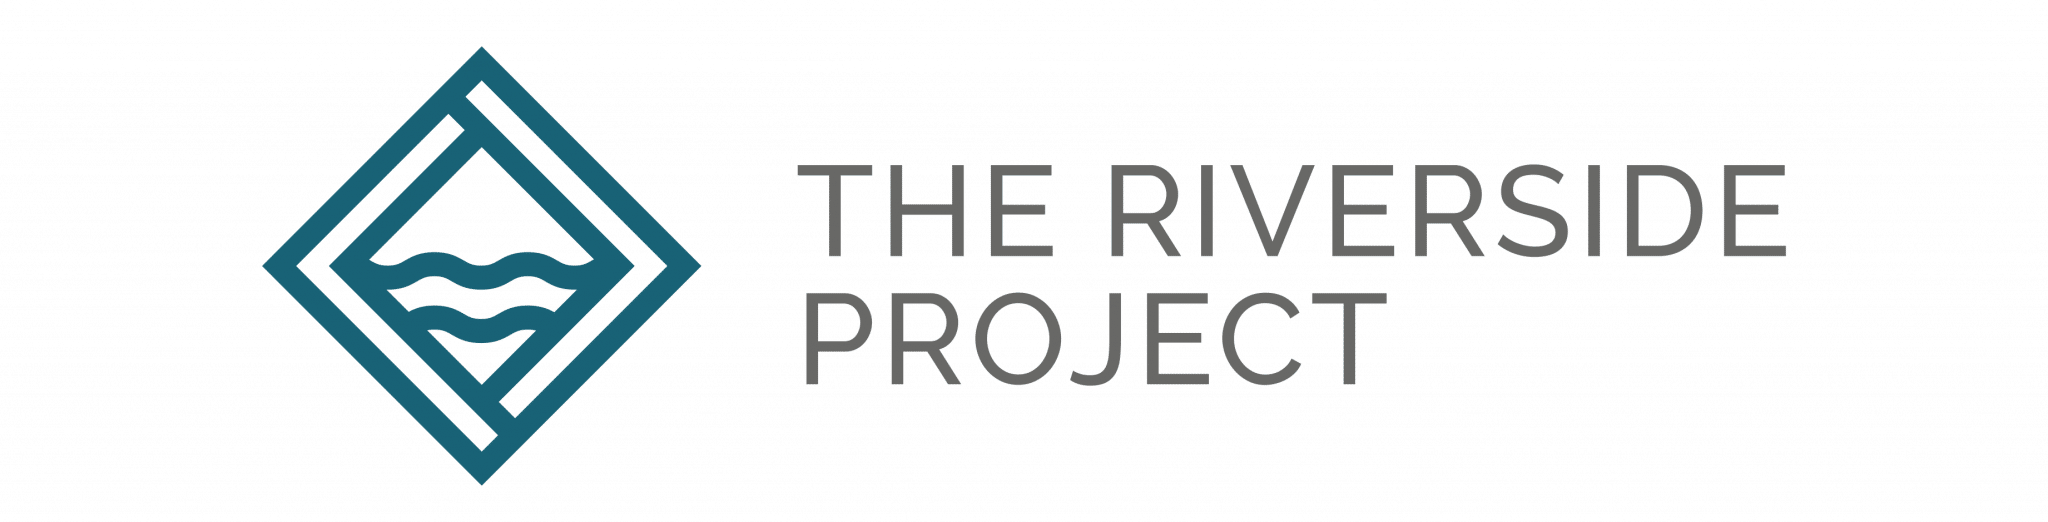 The Riverside Project